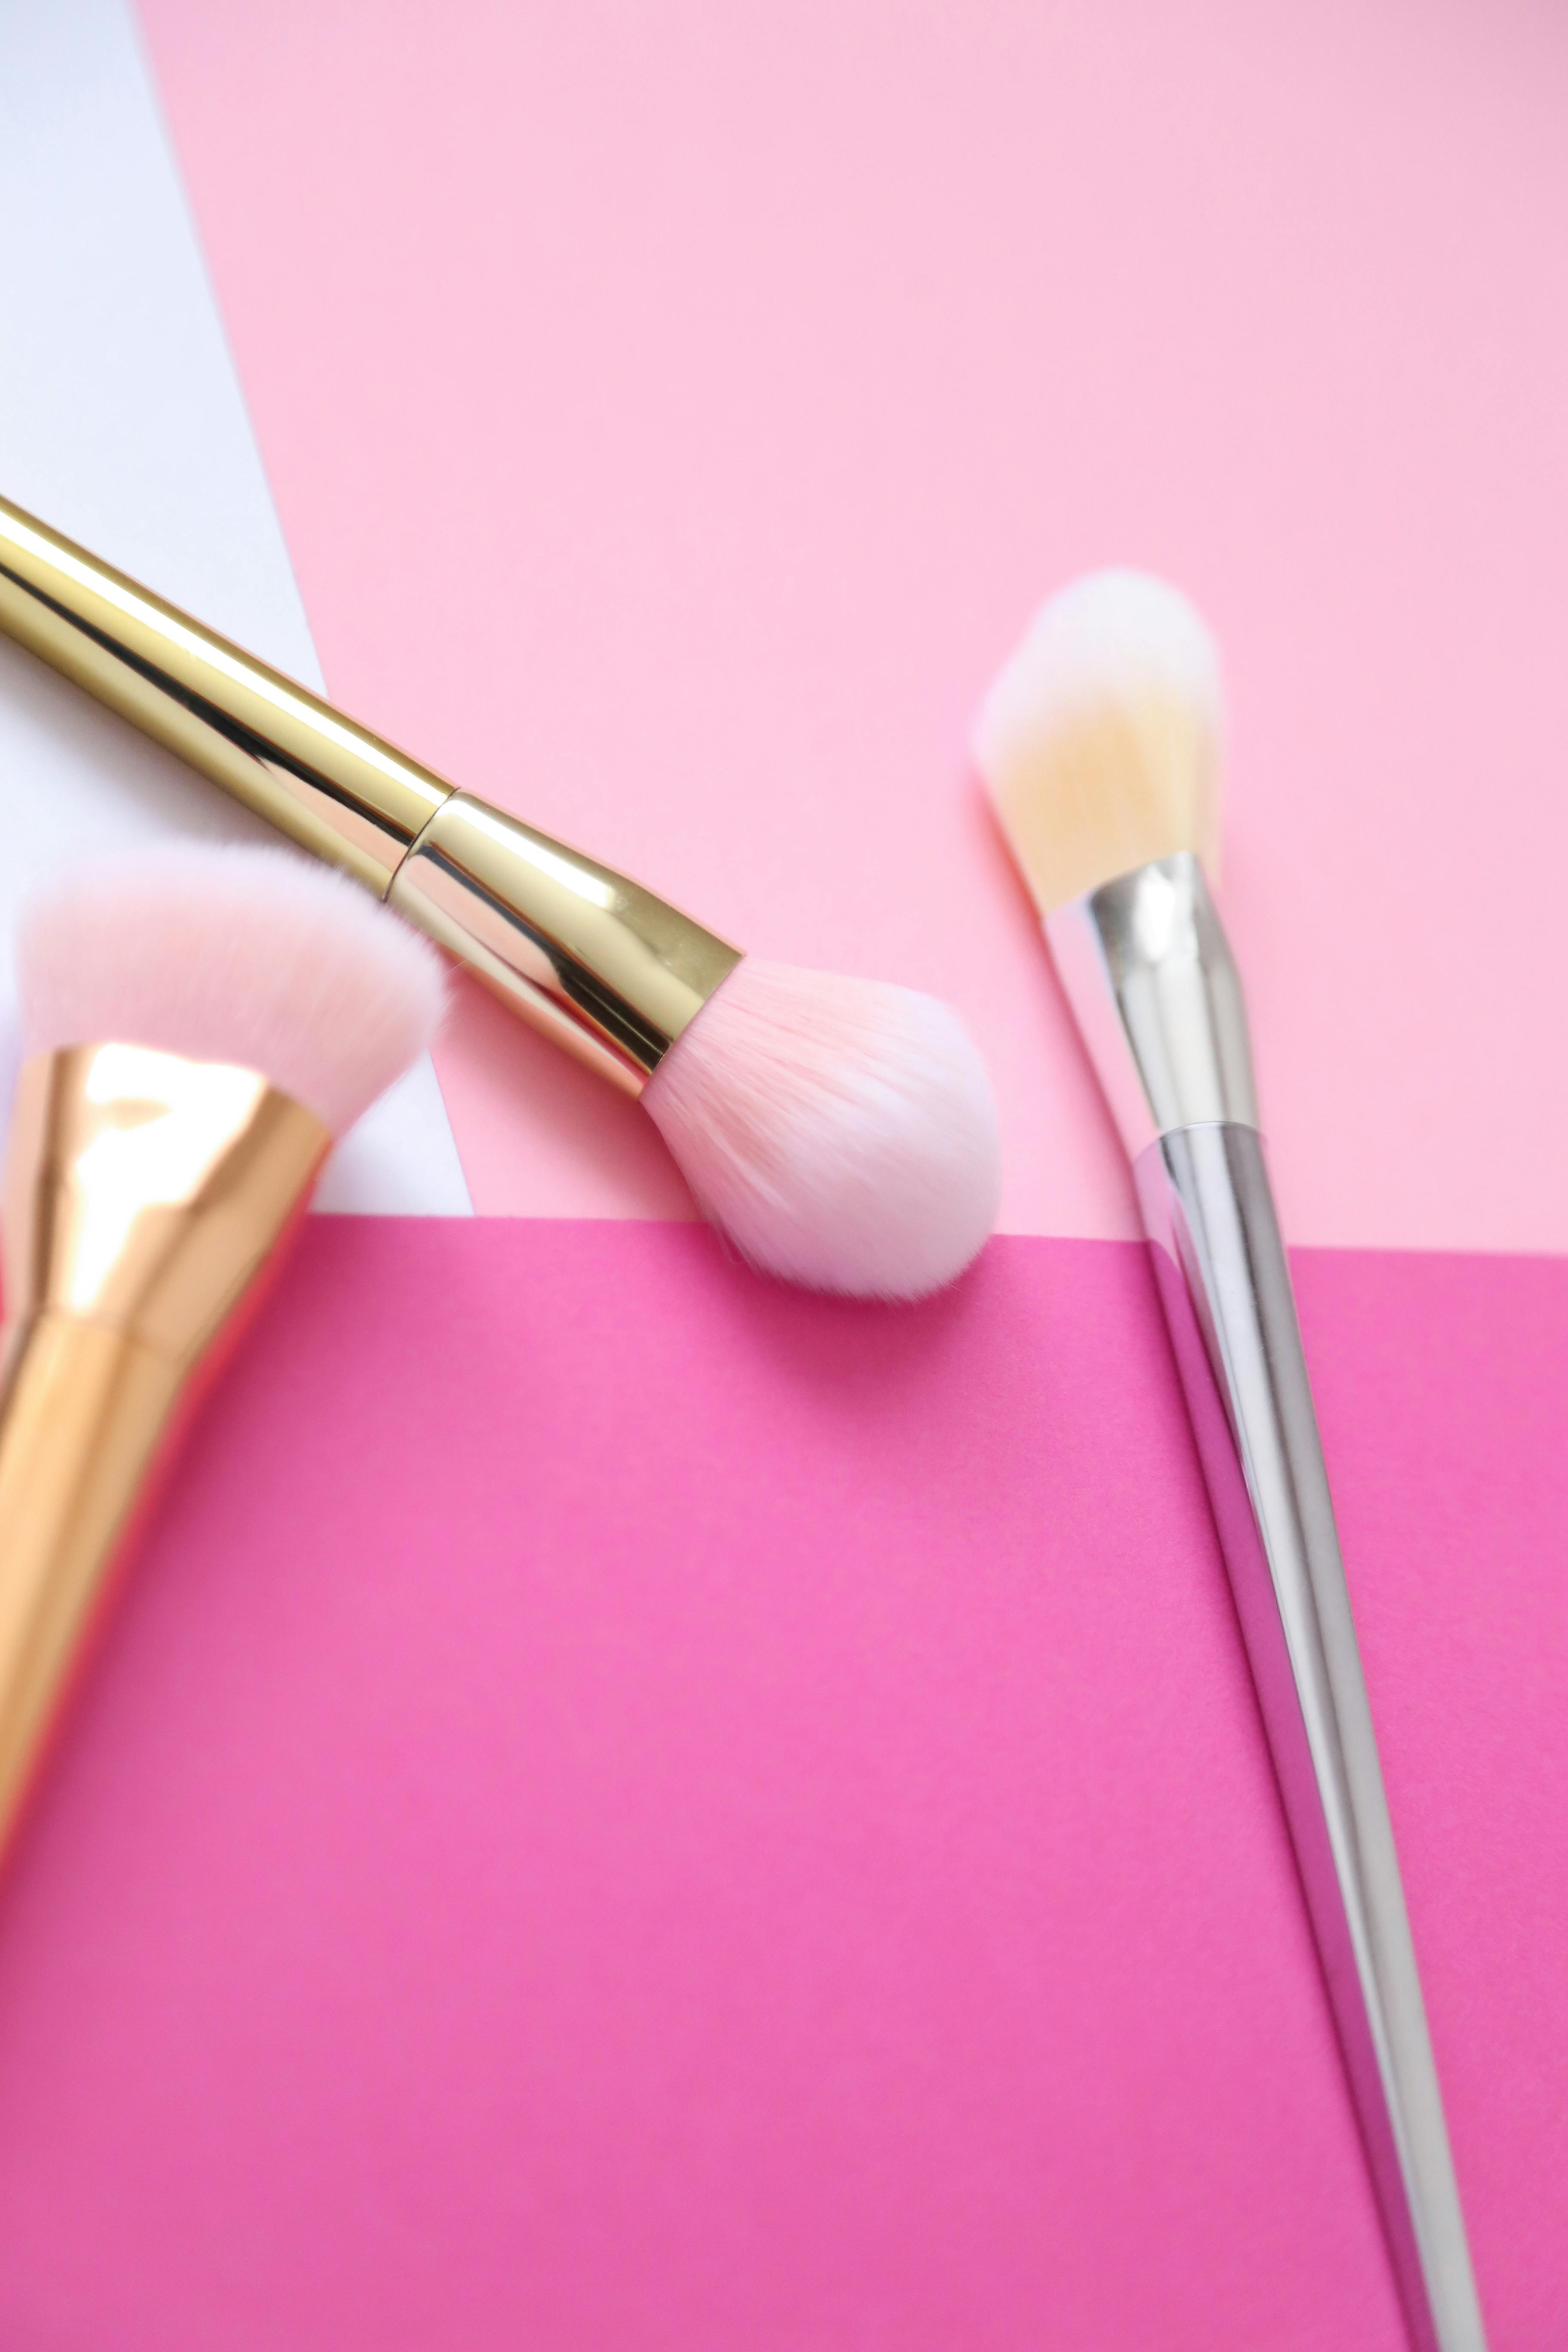 makeup brushes over a pink surface